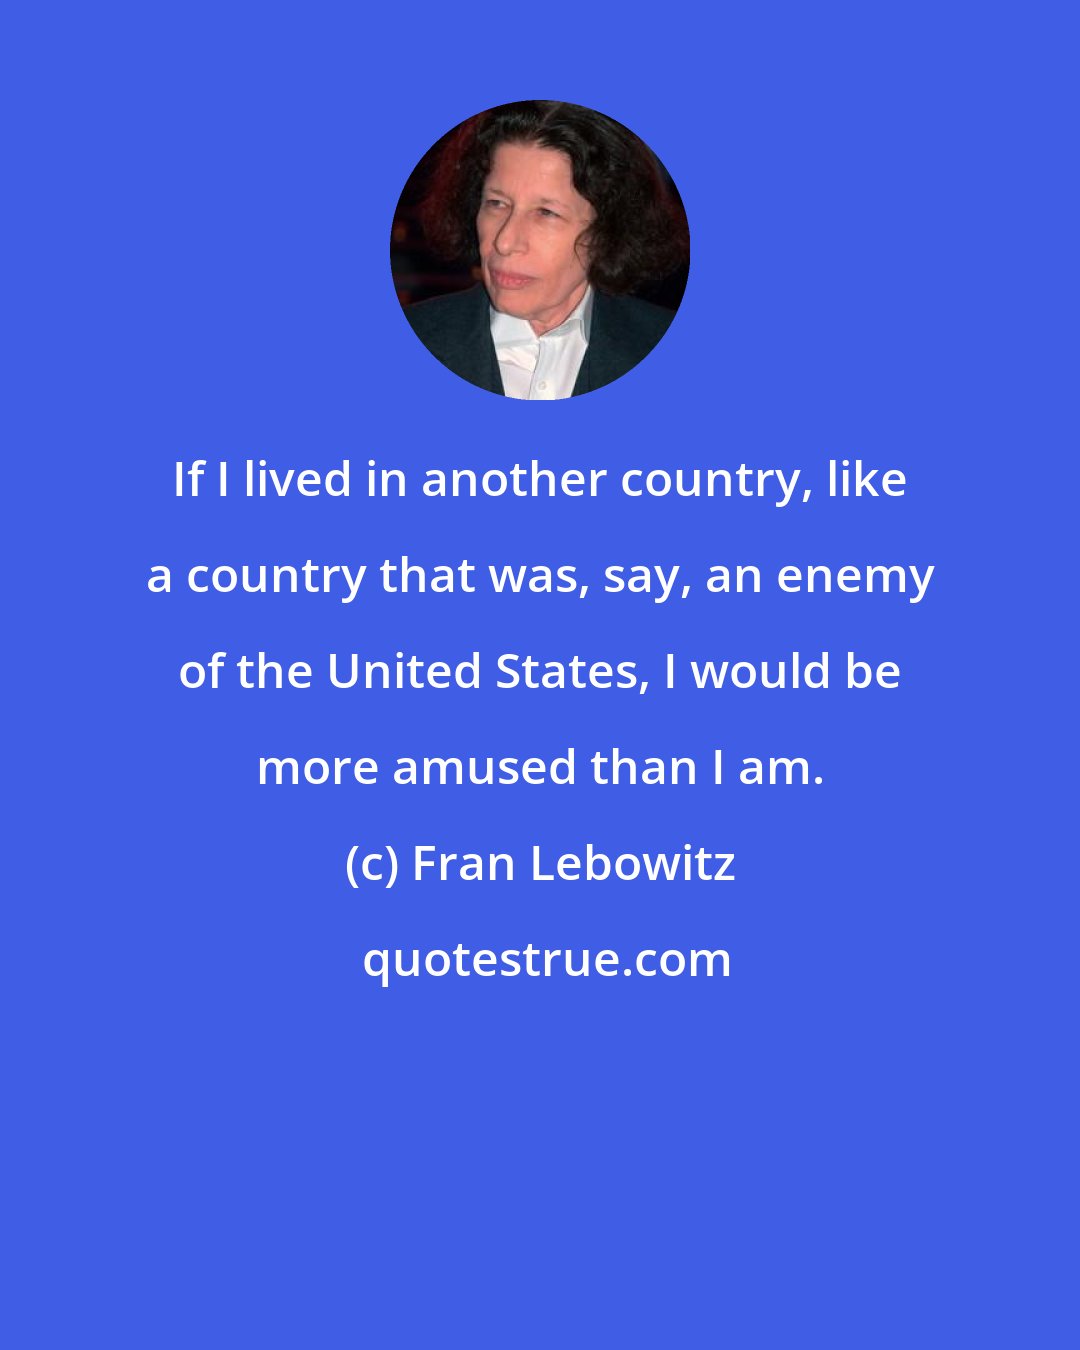 Fran Lebowitz: If I lived in another country, like a country that was, say, an enemy of the United States, I would be more amused than I am.